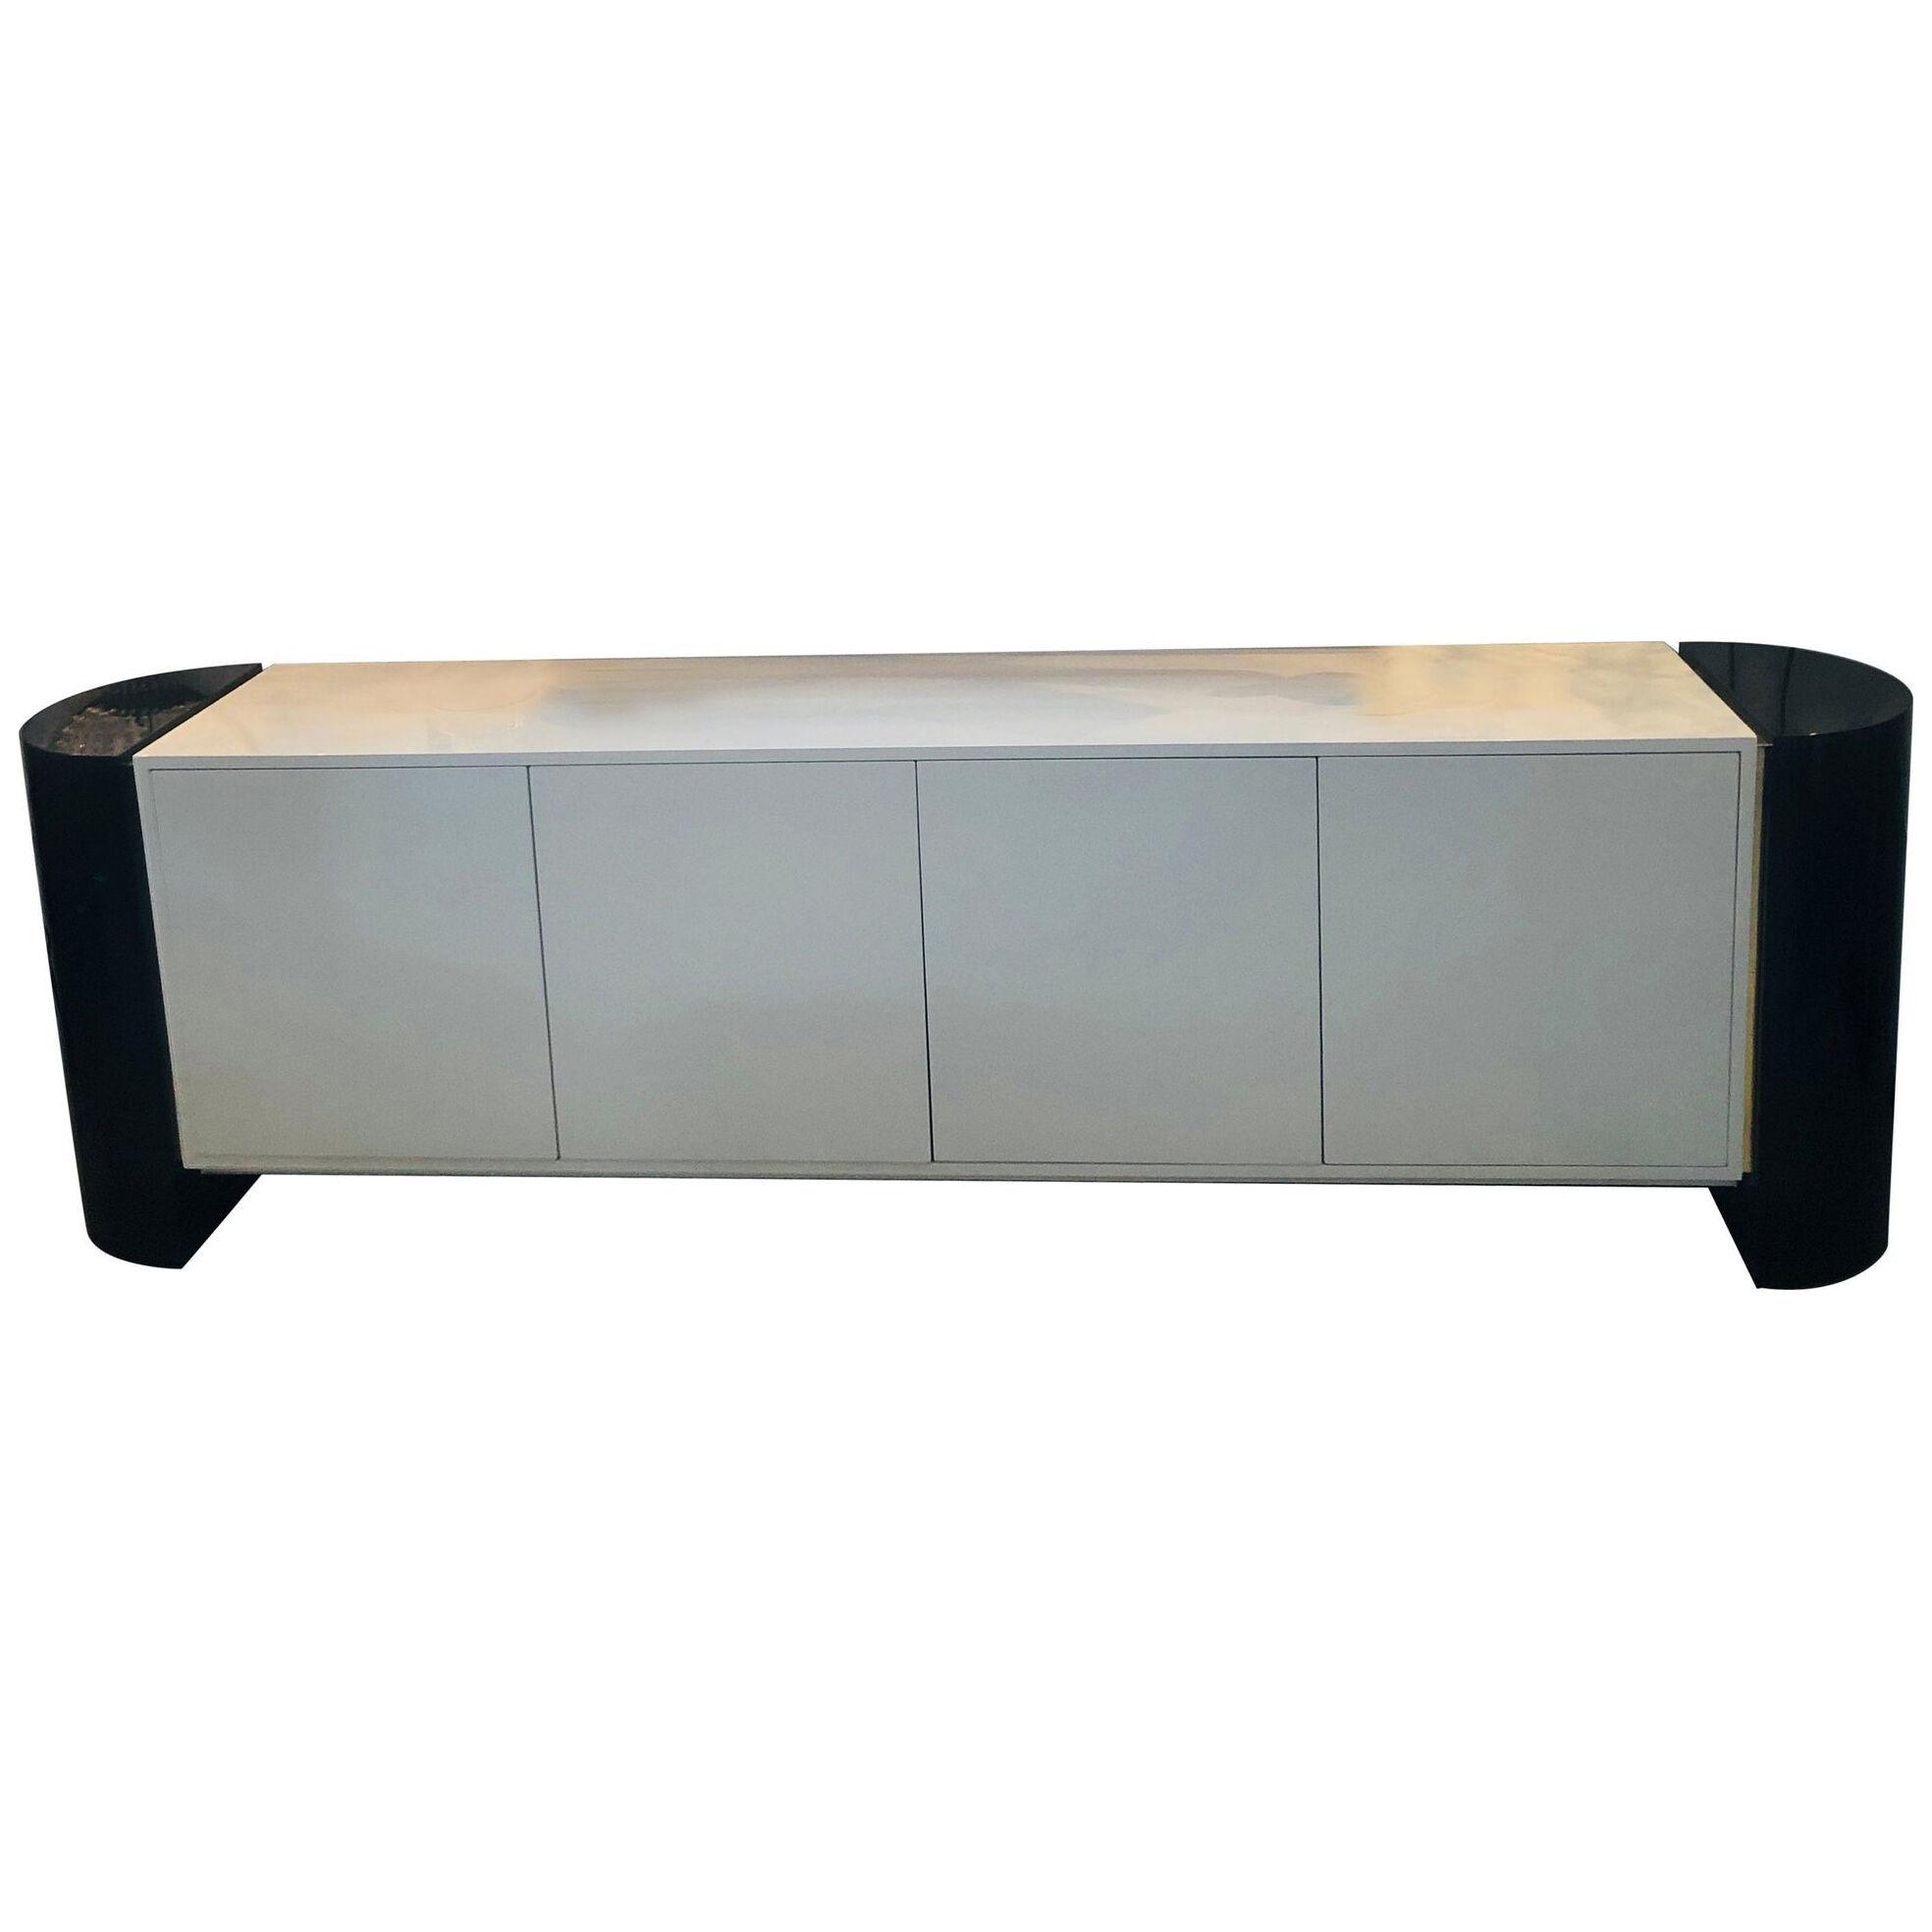 Mid-Century Modernist Long Black and White Lacquered Credenza Sideboard Cabinet